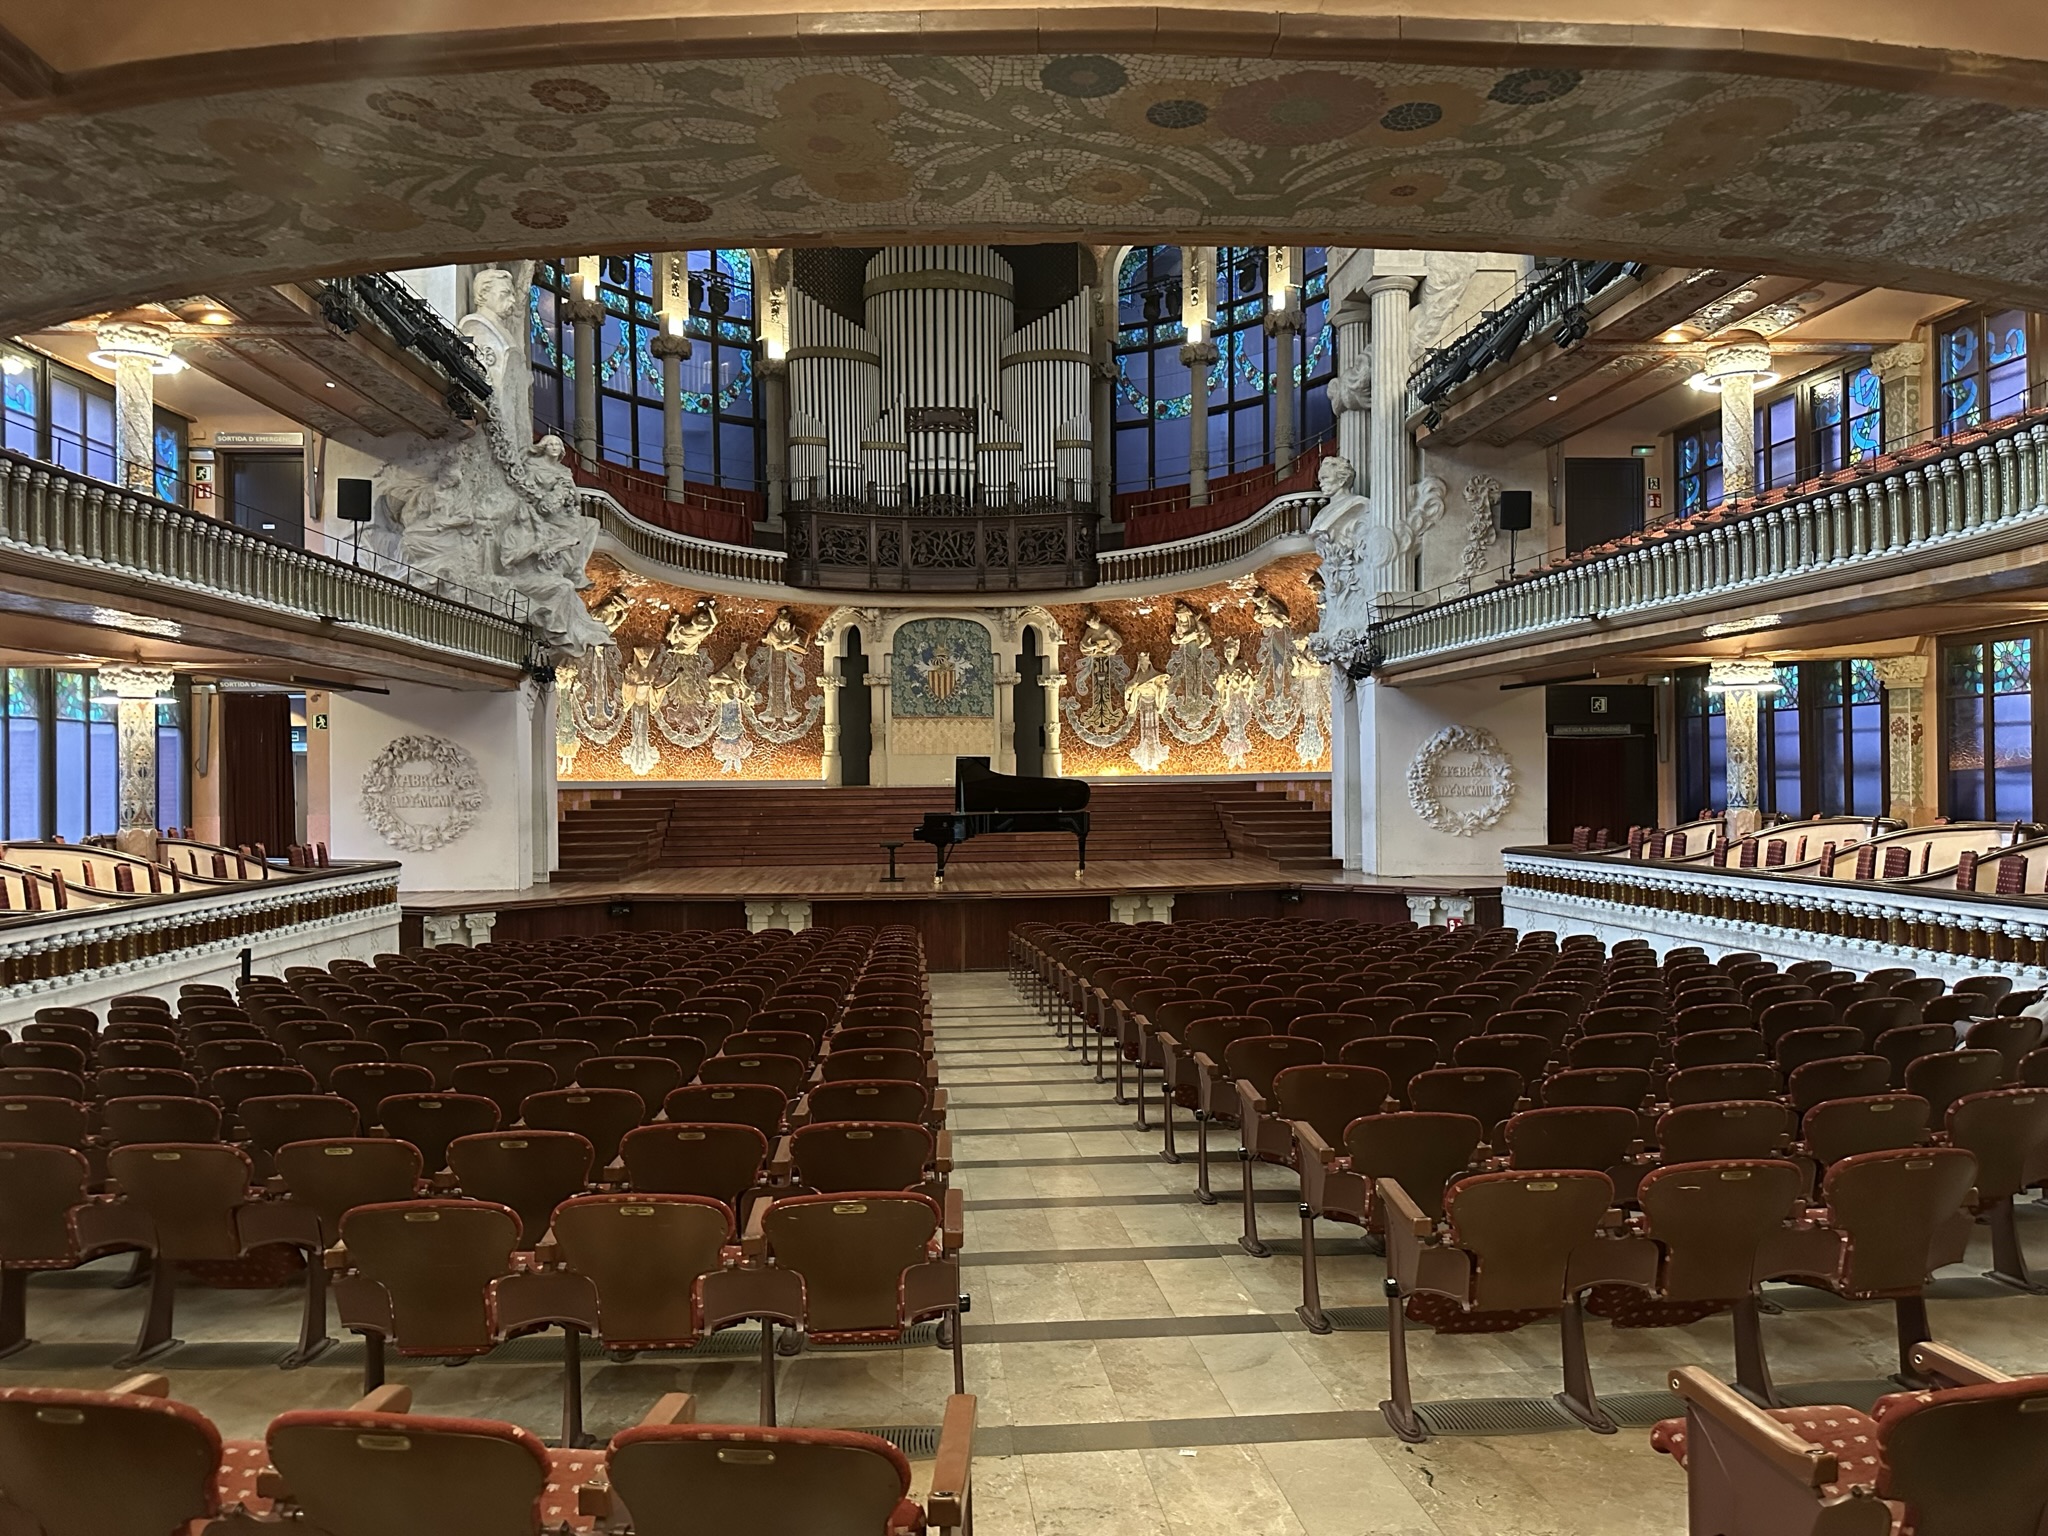 This magical concert hall was established in 1908 and now has a capacity of more than 2,200 seats.